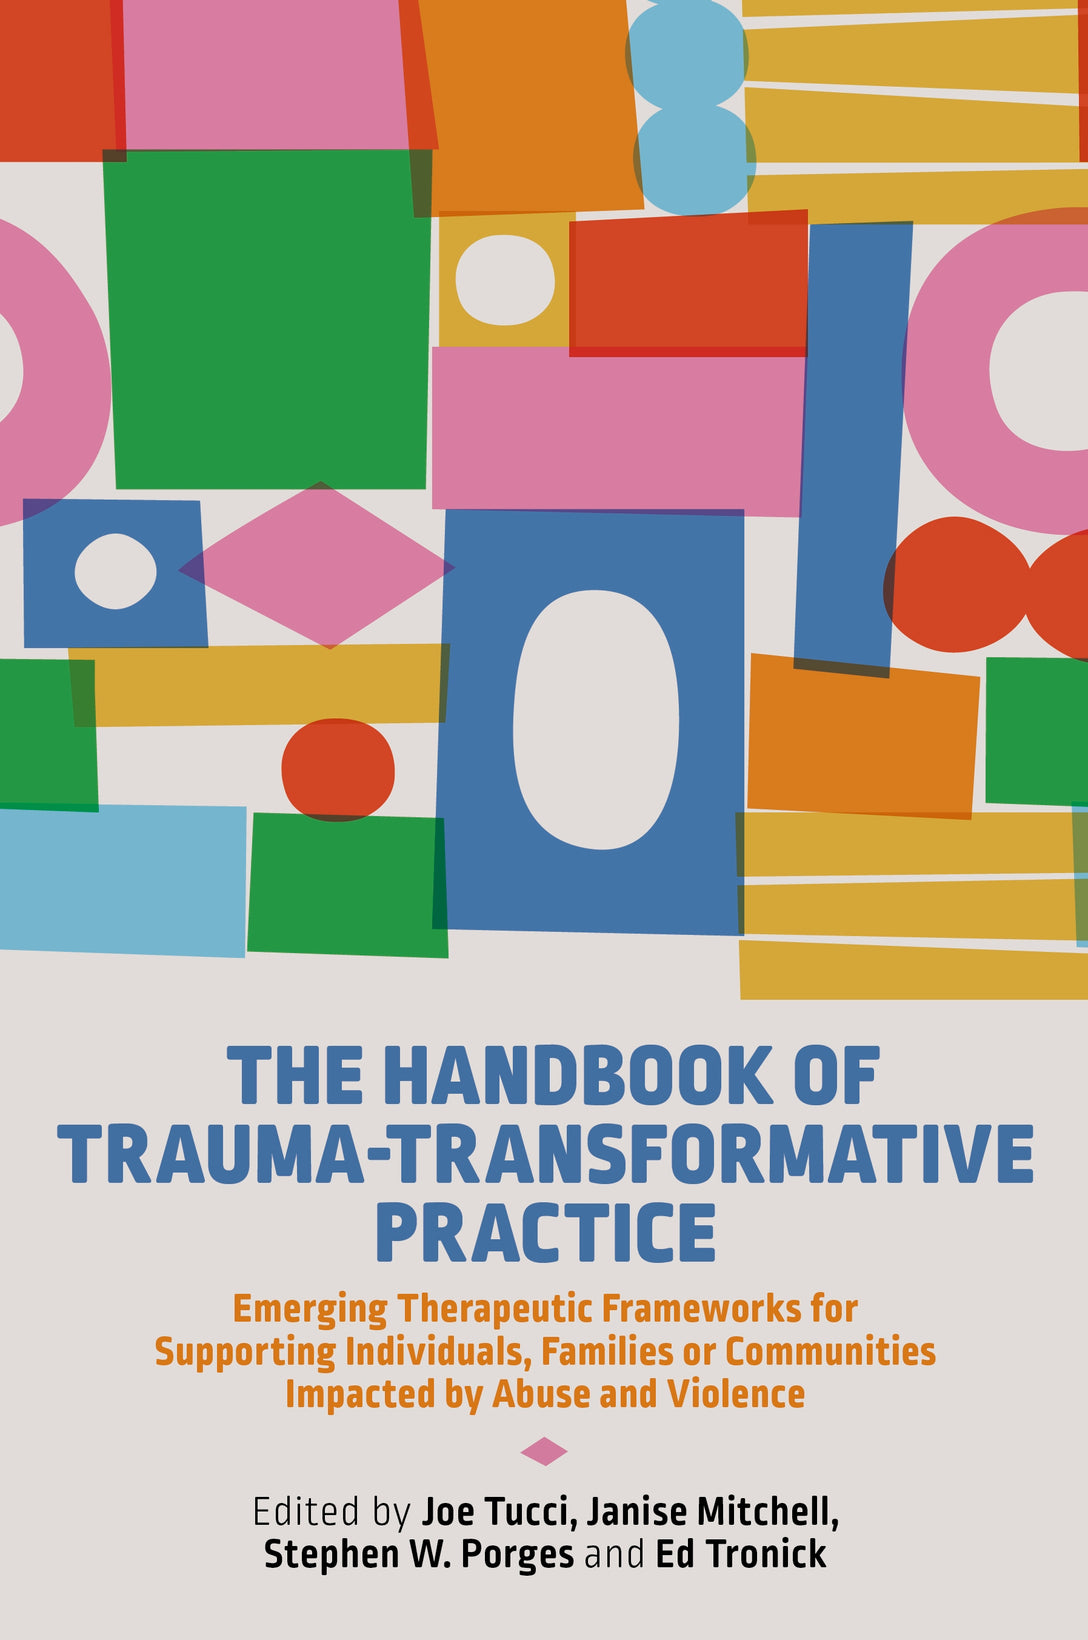 The Handbook of Trauma-Transformative Practice by Joe Tucci, Janise Mitchell, Stephen W. Porges, Edward C Tronick, No Author Listed